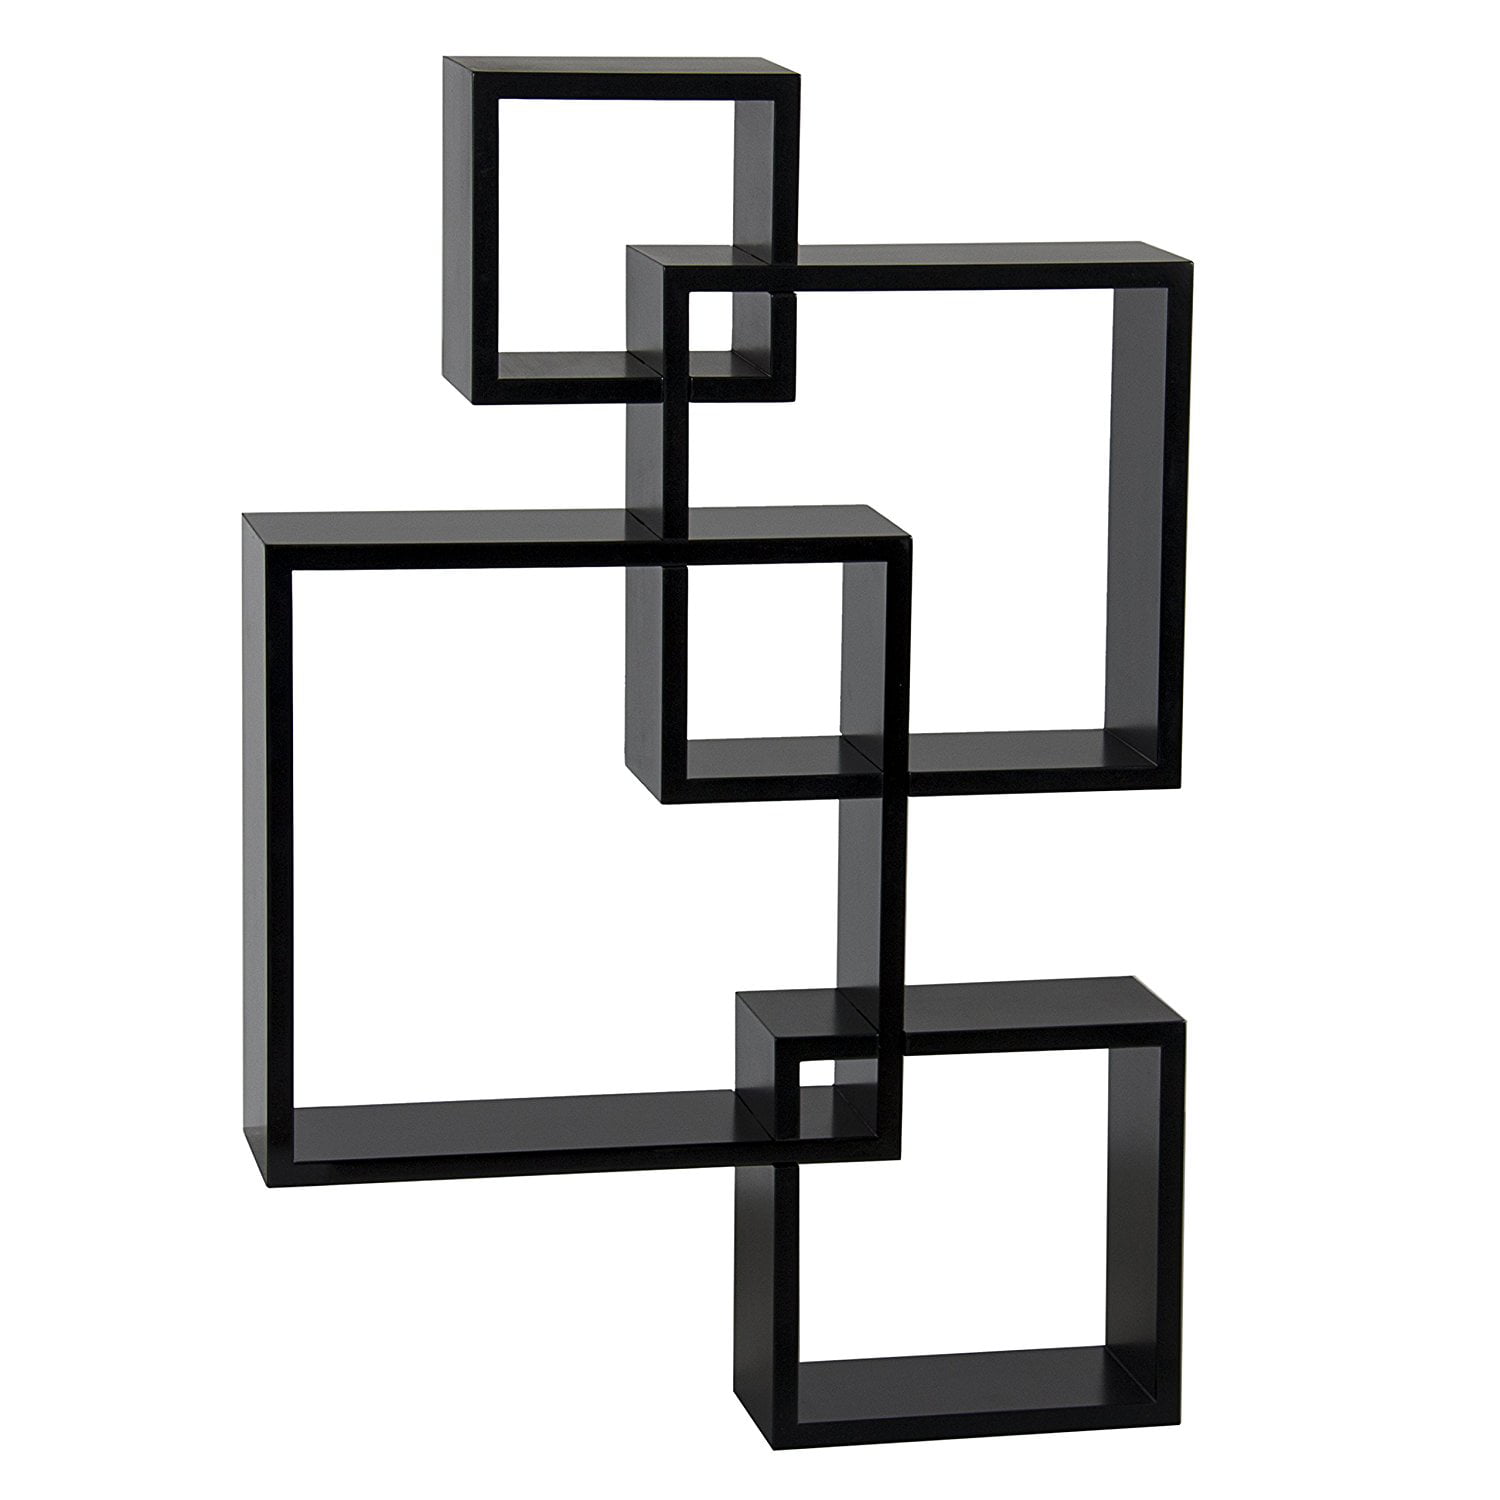 Black Intersecting 3 Square Floating Shelf Wall Mounted Home Furniture Decor MG 